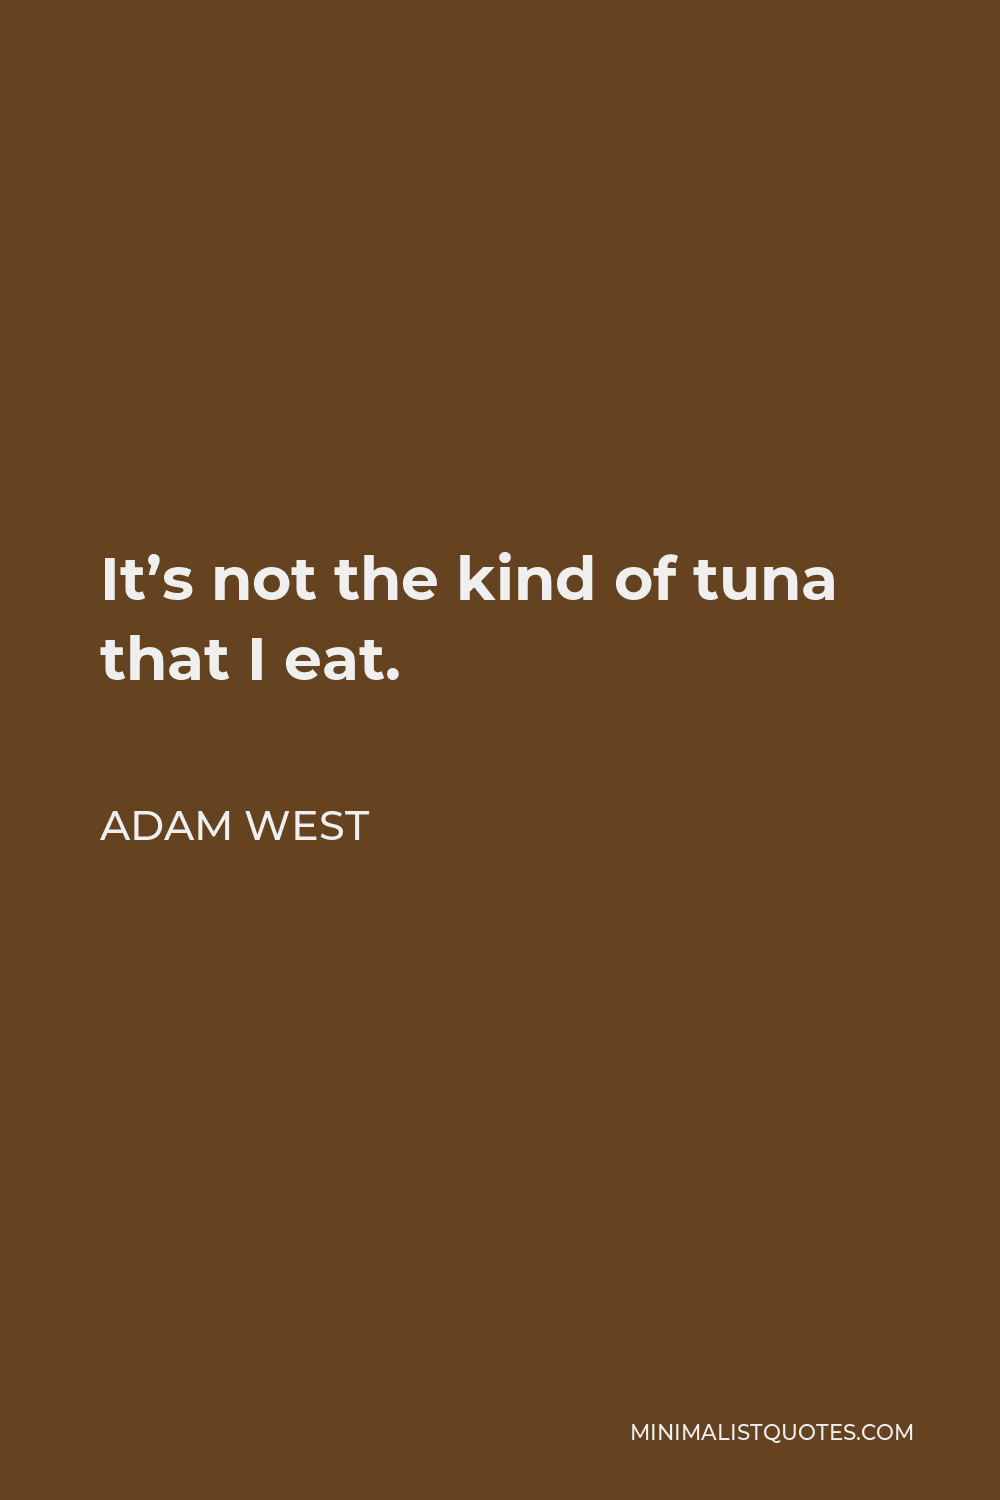 Adam West Quote - It’s not the kind of tuna that I eat.